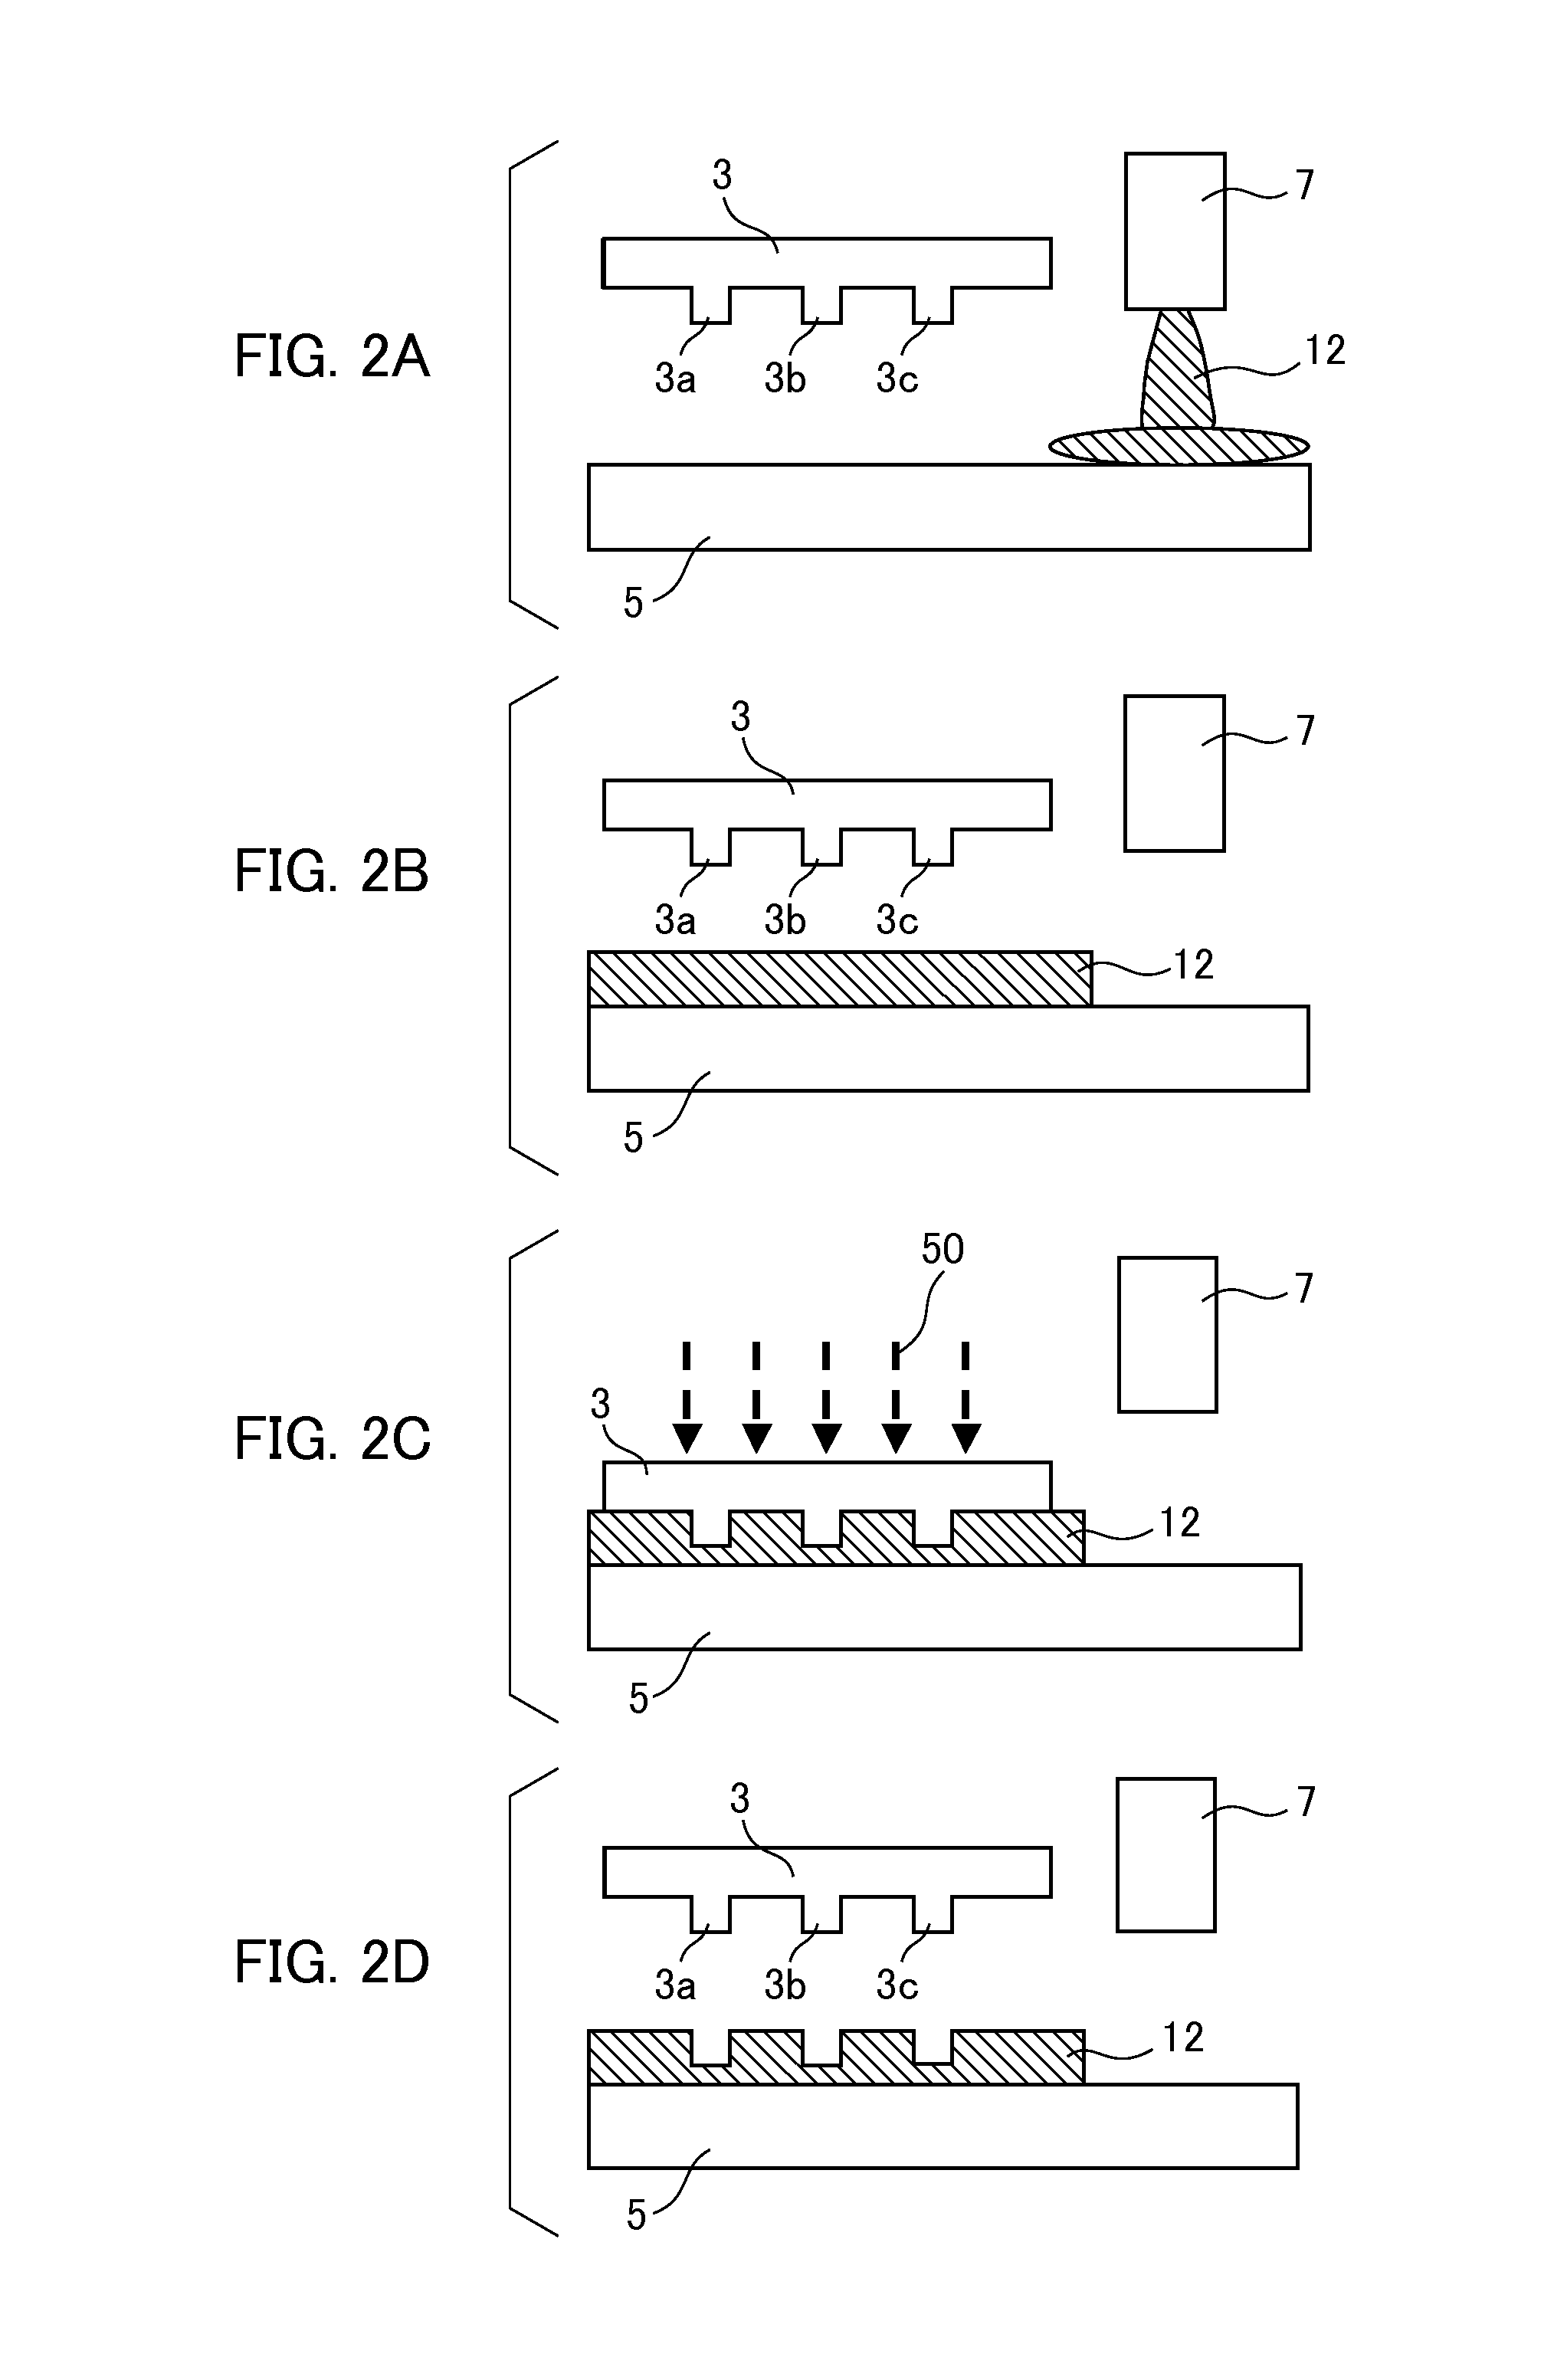 Imprint apparatus and article manufacturing method